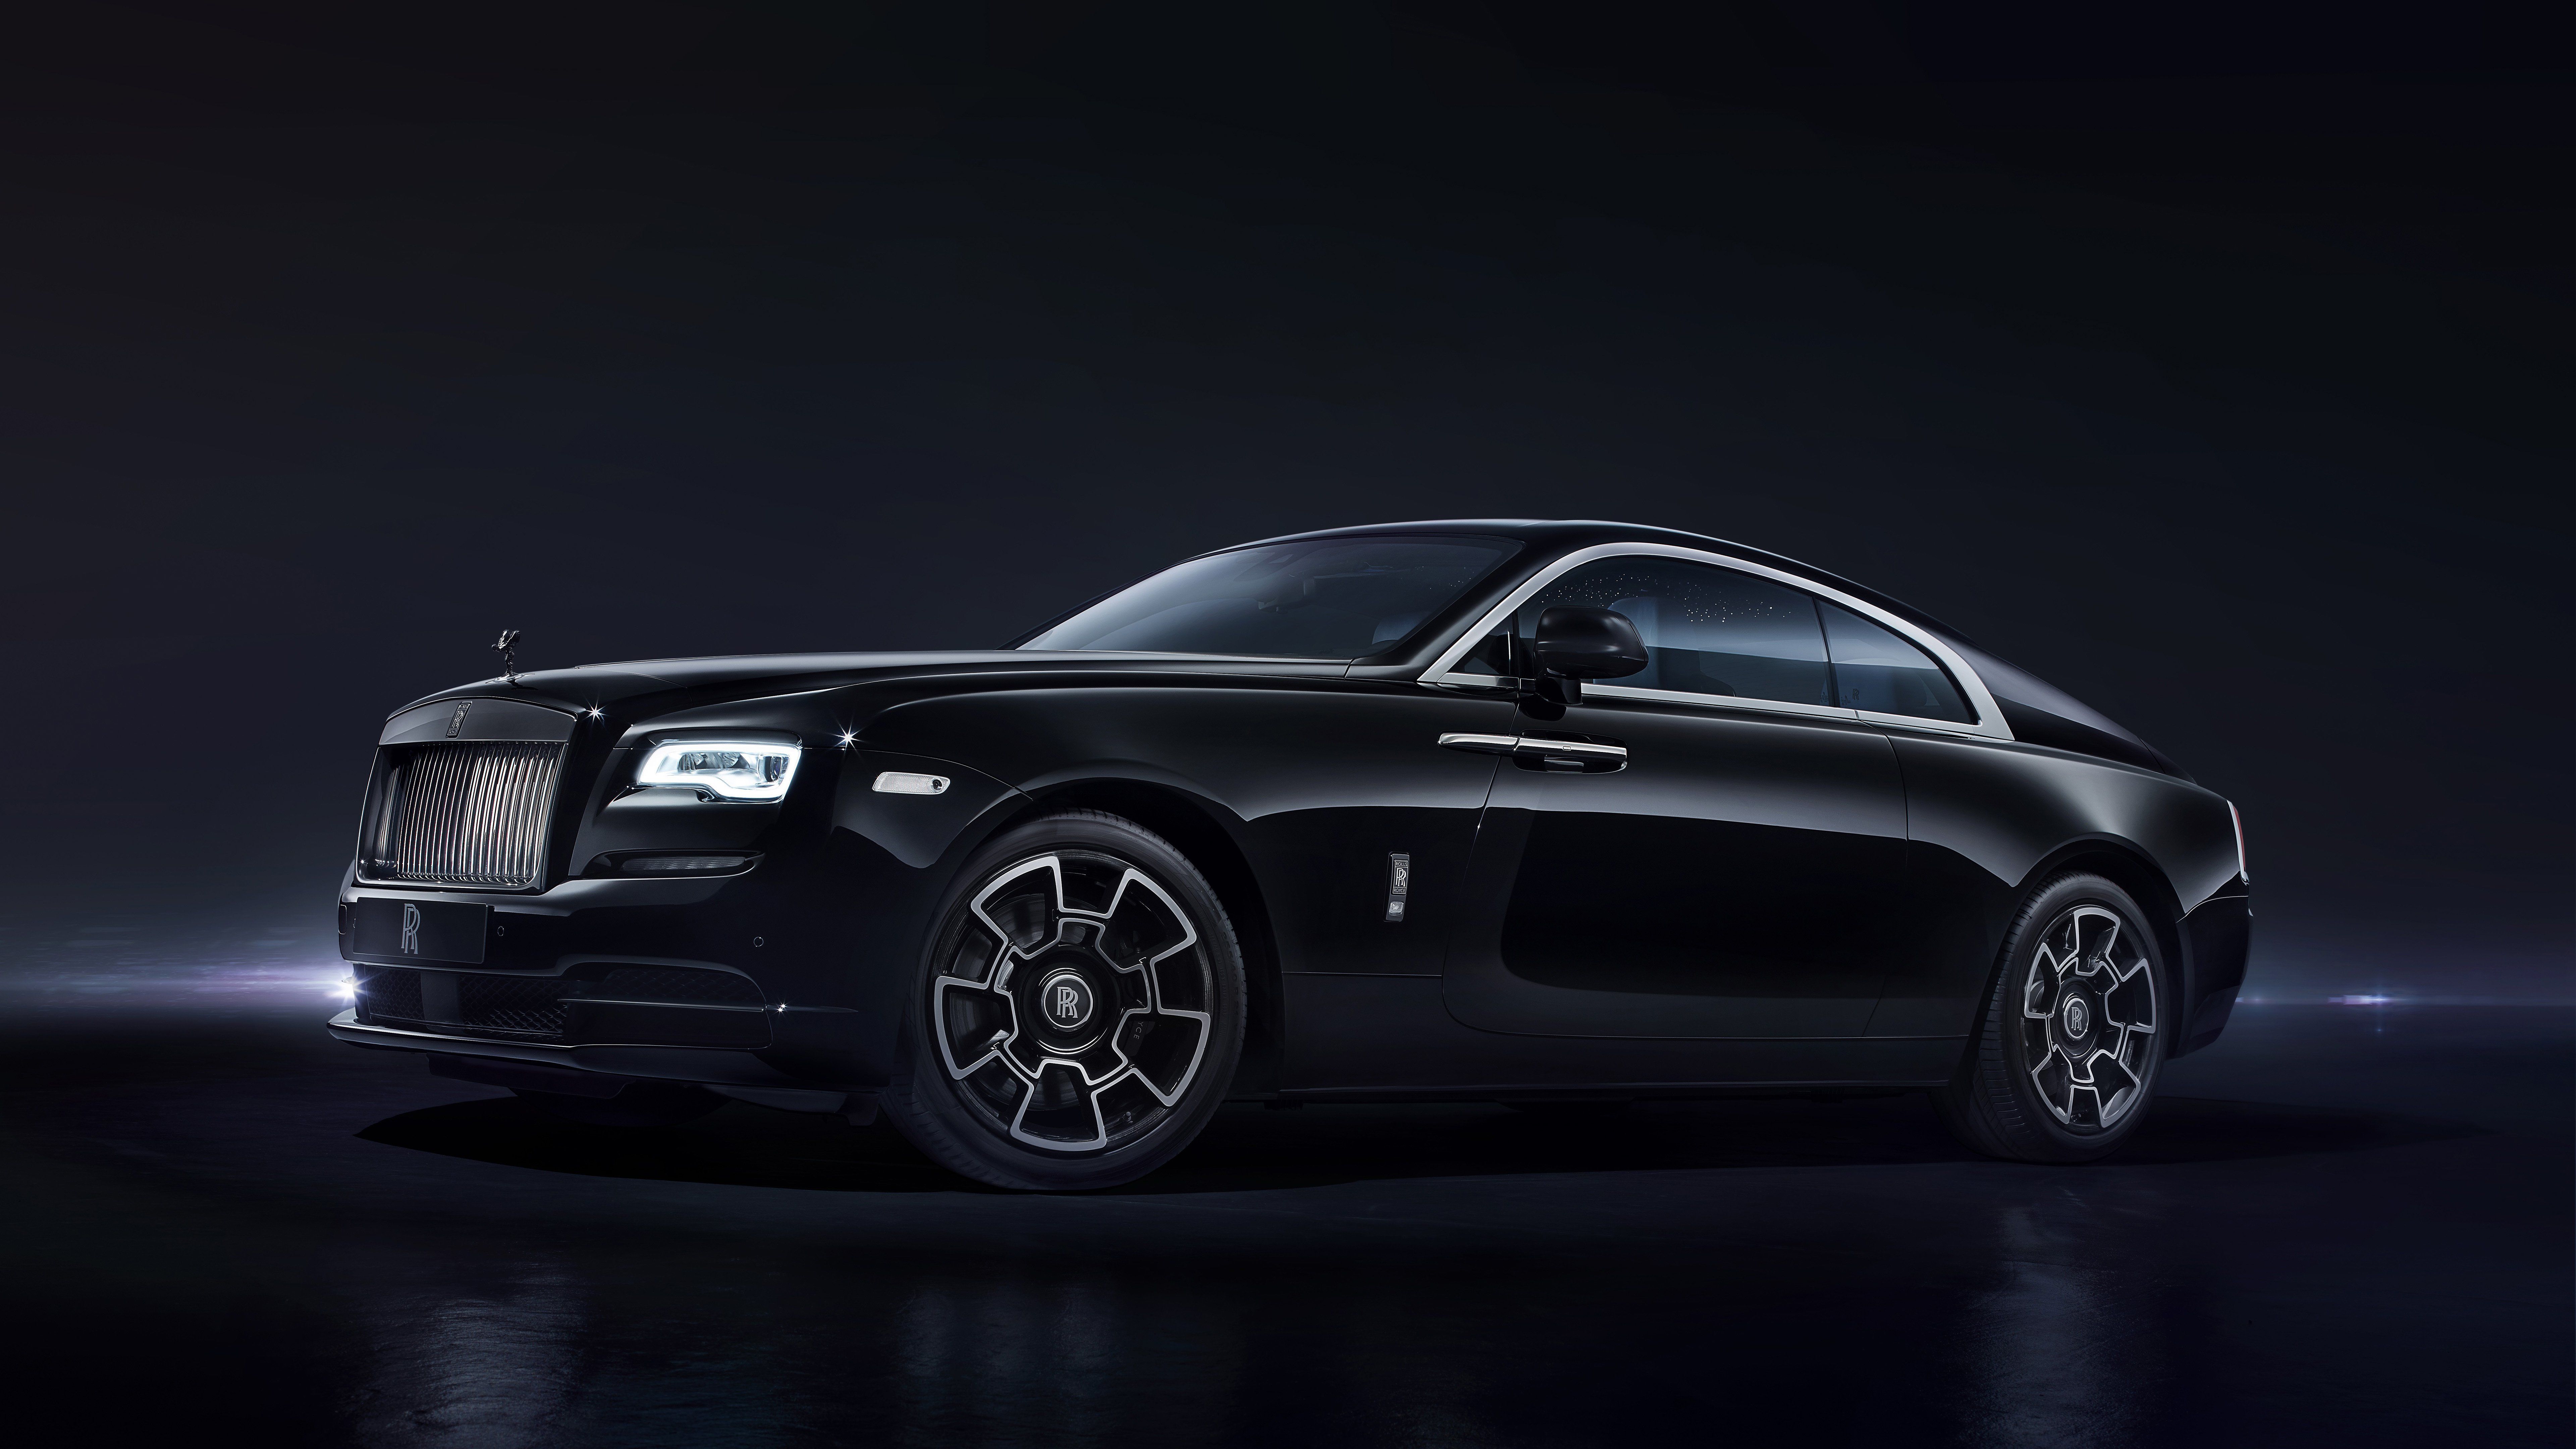 Rolls Royce Black 2017 8k HD 4k Wallpaper, Image, Background, Photo and Picture